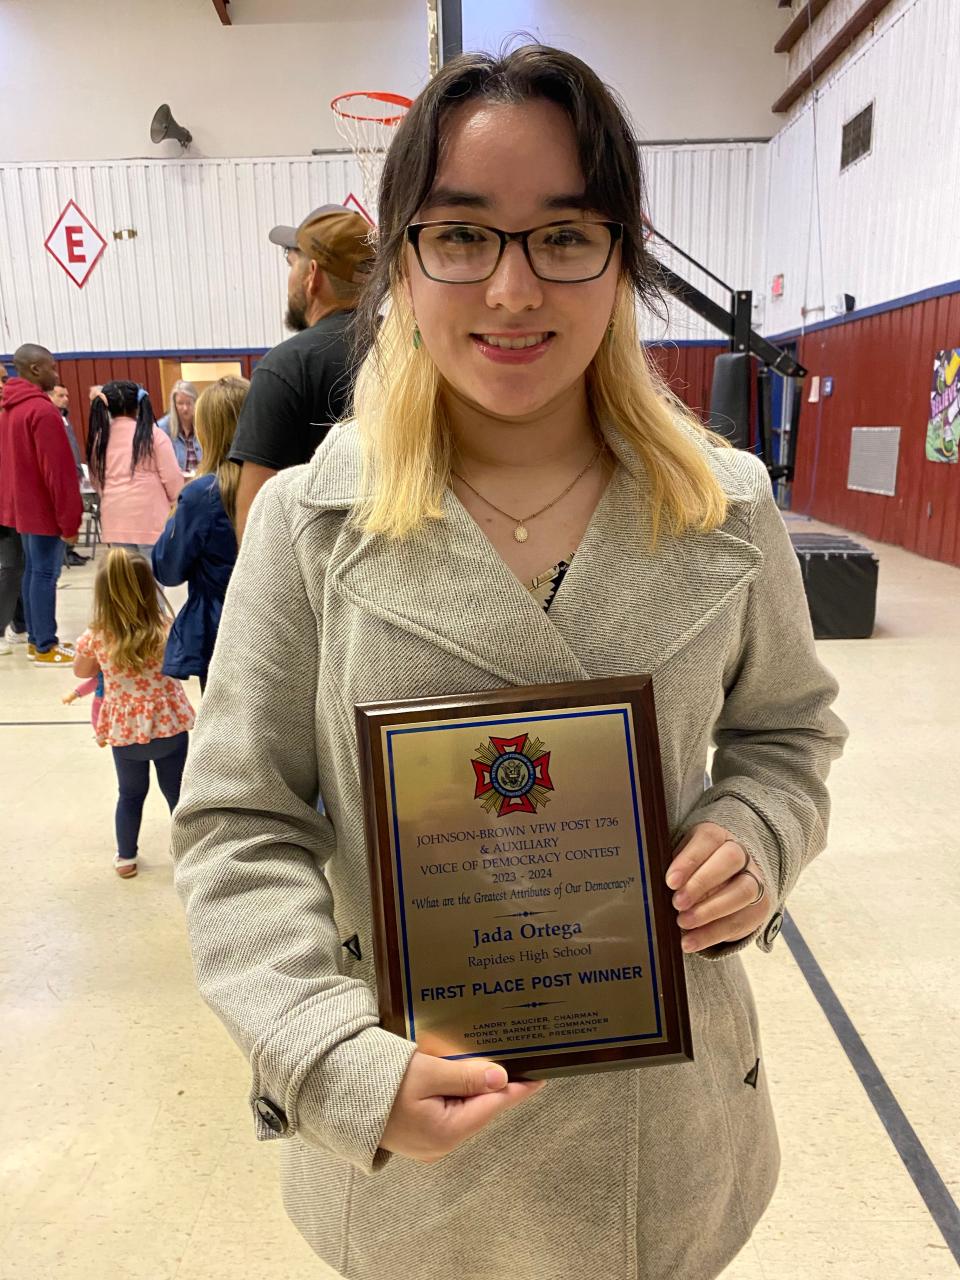 Rapides High School senior Jada Ortega placed first in the Veteran of Foreign Wars & Auxiliary Post 1736 Voice of Democracy essay contest for high school students. The topic was What Are the Greatest Attributes of Our Democracy.”